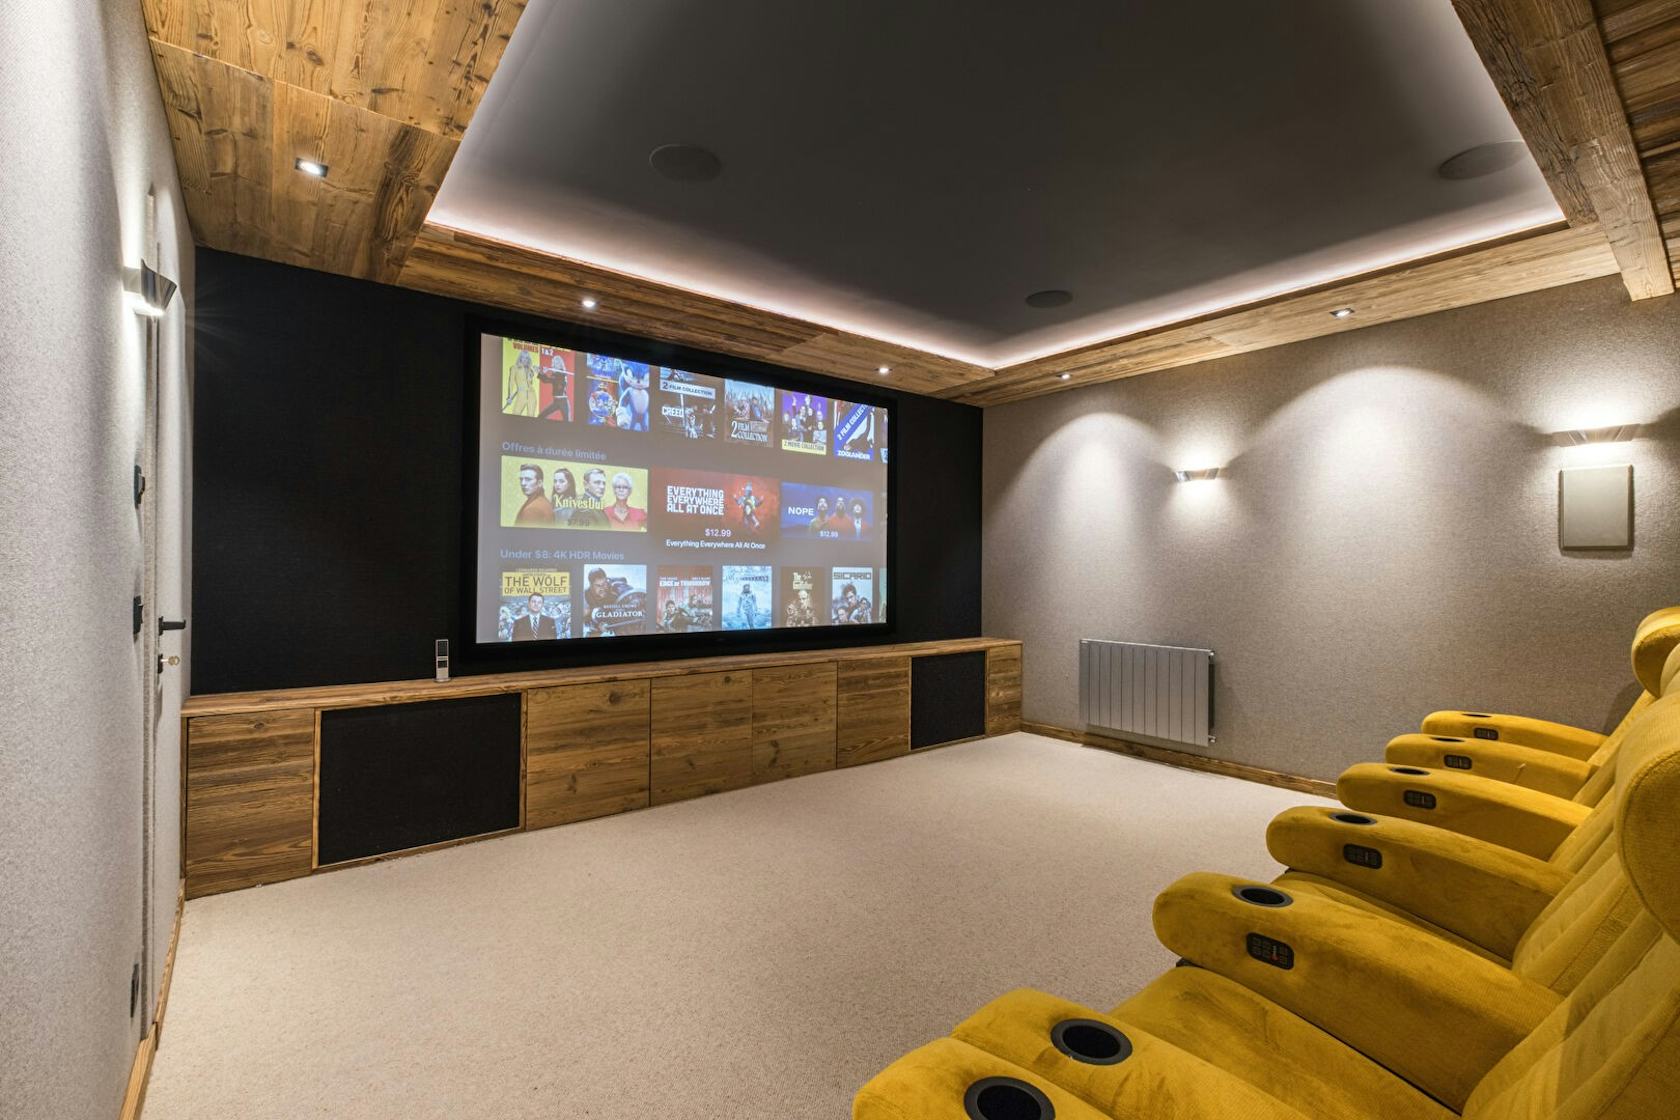 indoors interior design electronics home theater screen people person computer hardware hardware monitor